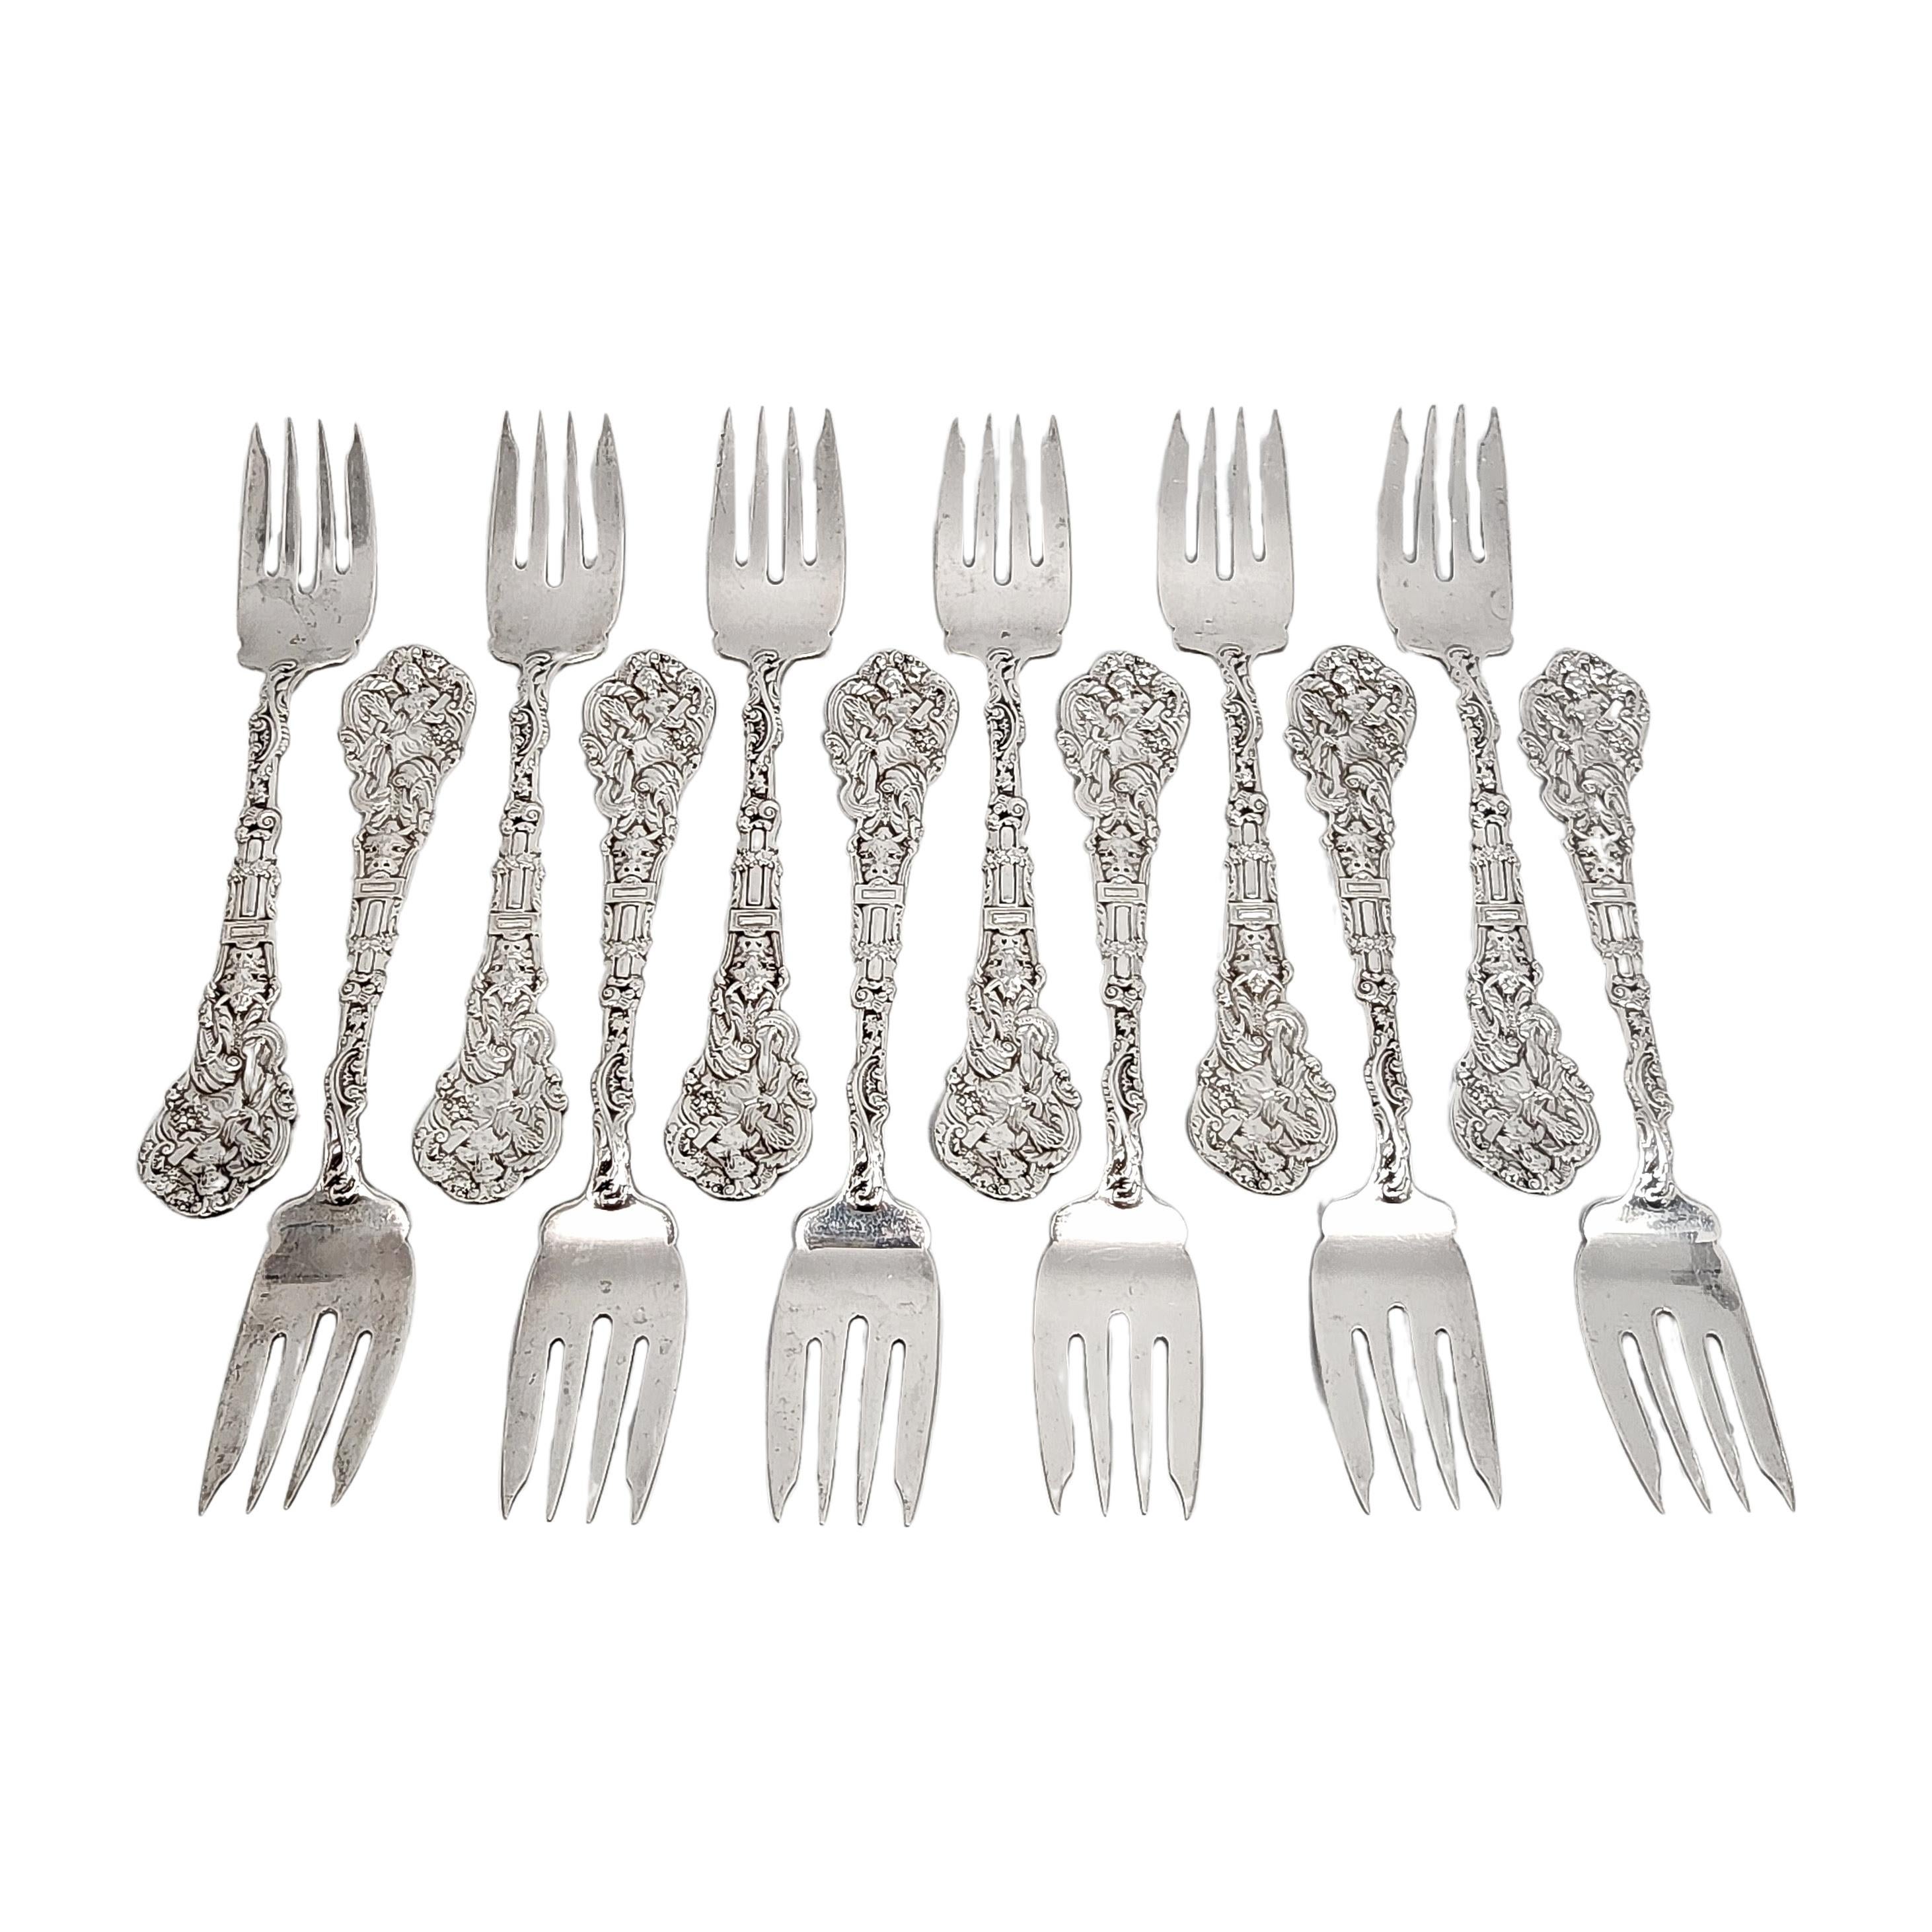 Set of 12 sterling silver salad forks by Gorham in the Versailles pattern.

No monogram

Gorham's Versailles is a multi motif pattern designed by Antone Heller in 1885. Named for the Palace of Versailles, the pattern depicts ornate scenes of